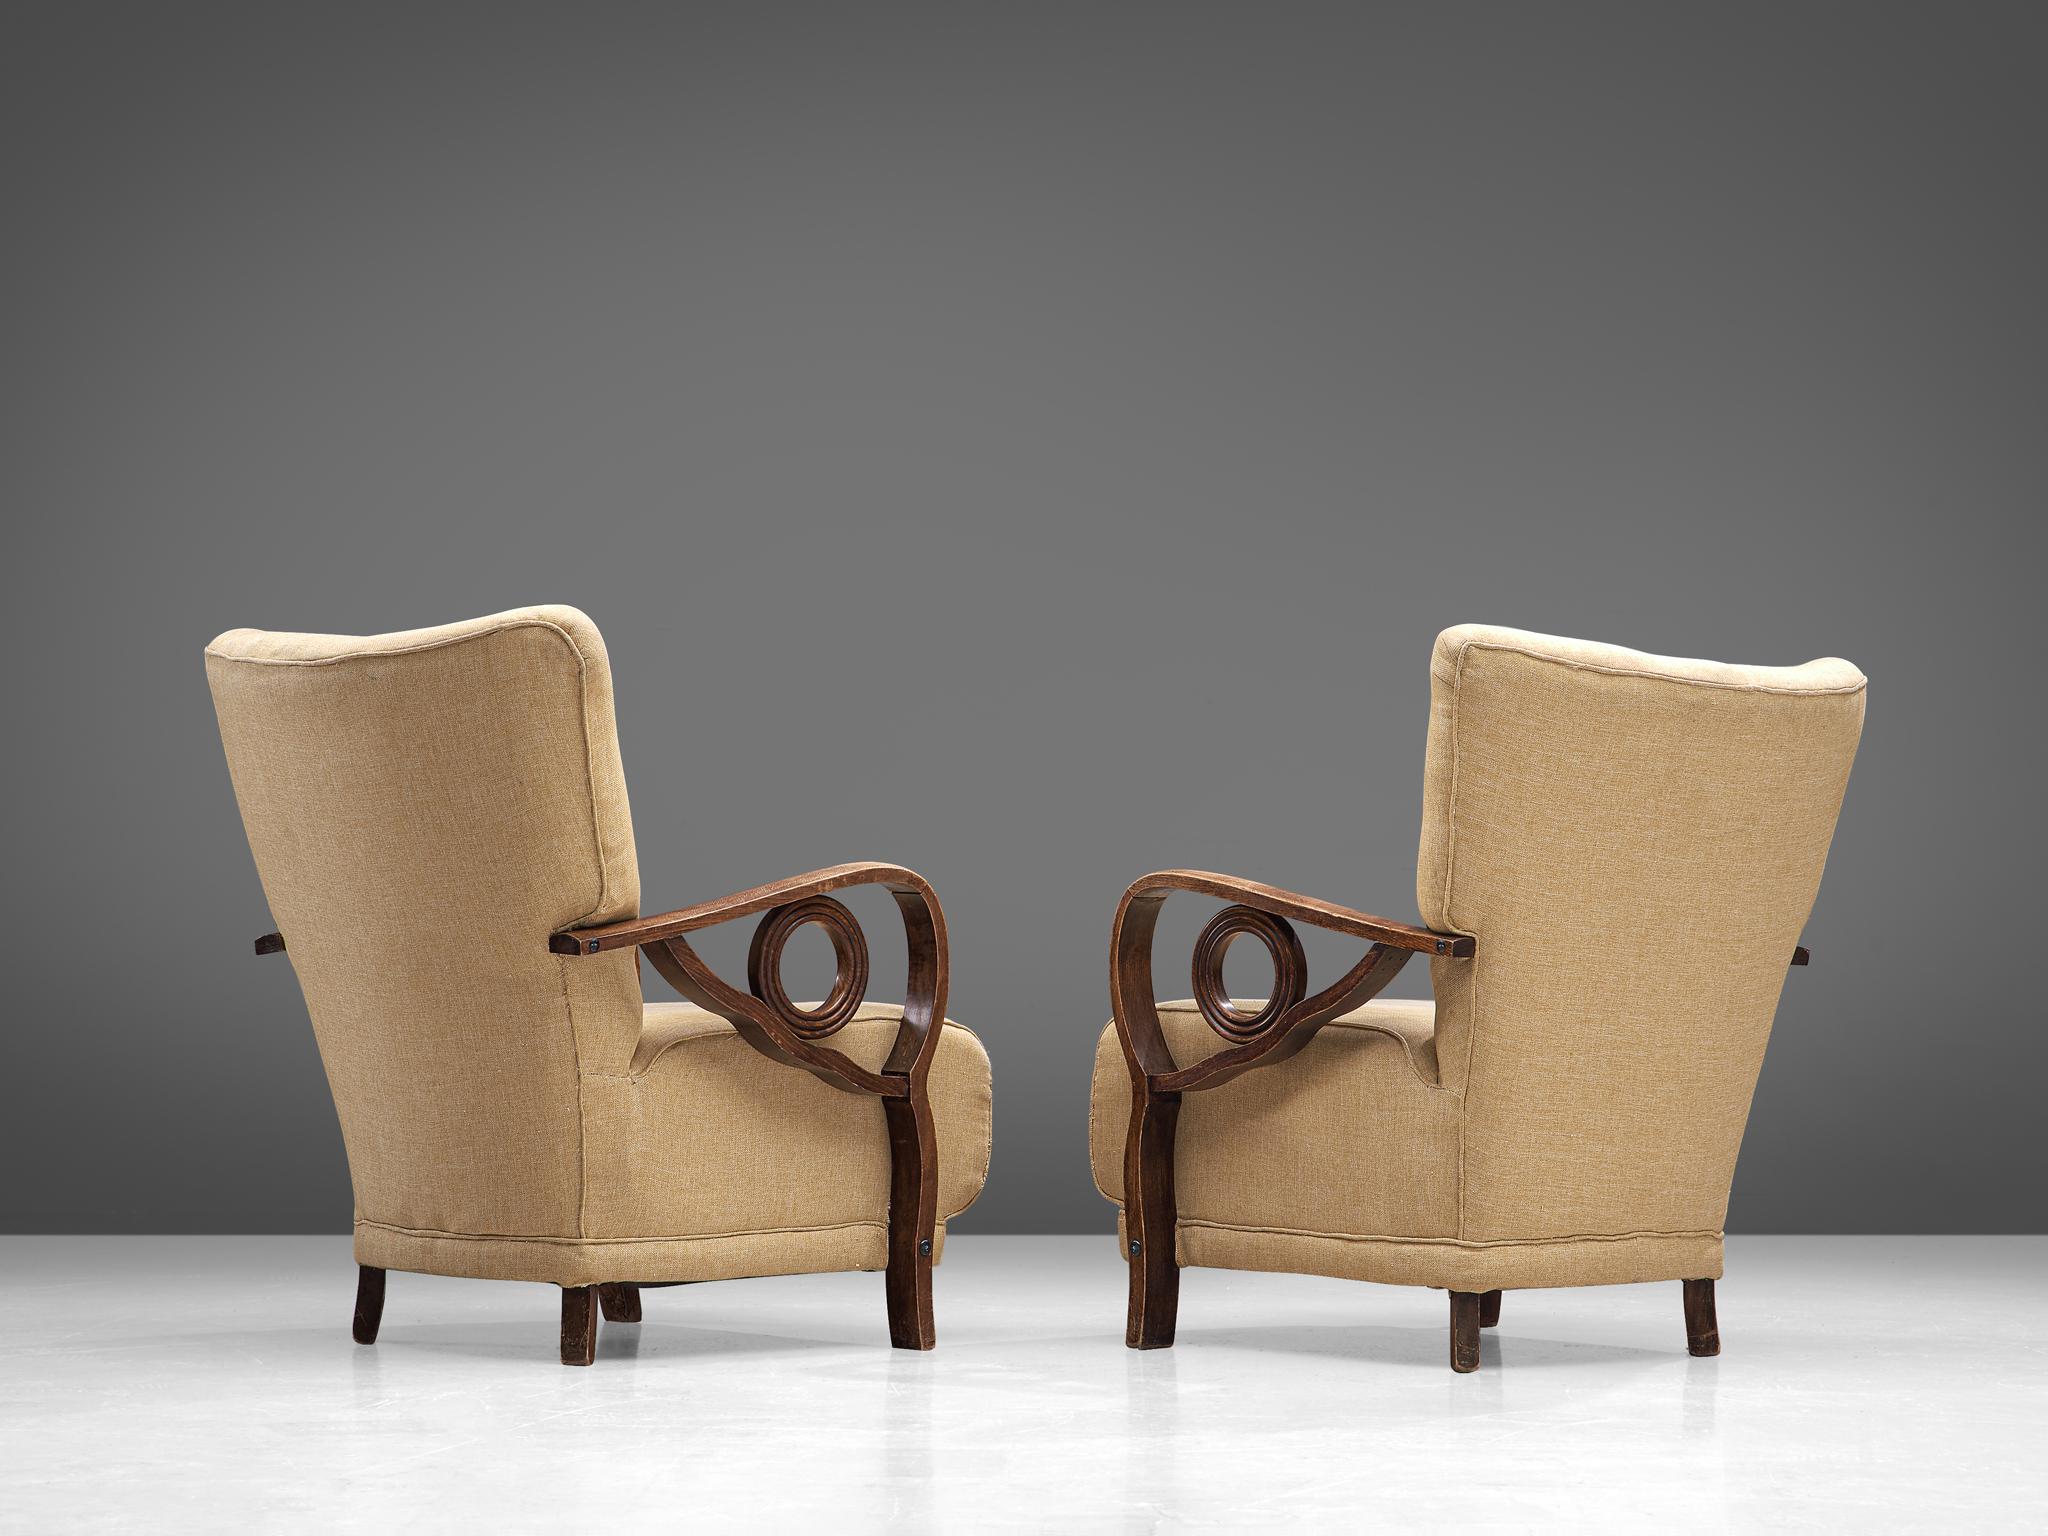 Pair of armchairs, oak and fabric, France, 1940s

The most distinctive feature of these Art Deco lounge chairs are the stained oak armrests that are curved with elegant details, such as the circular element in each arm. The seat is wide and the